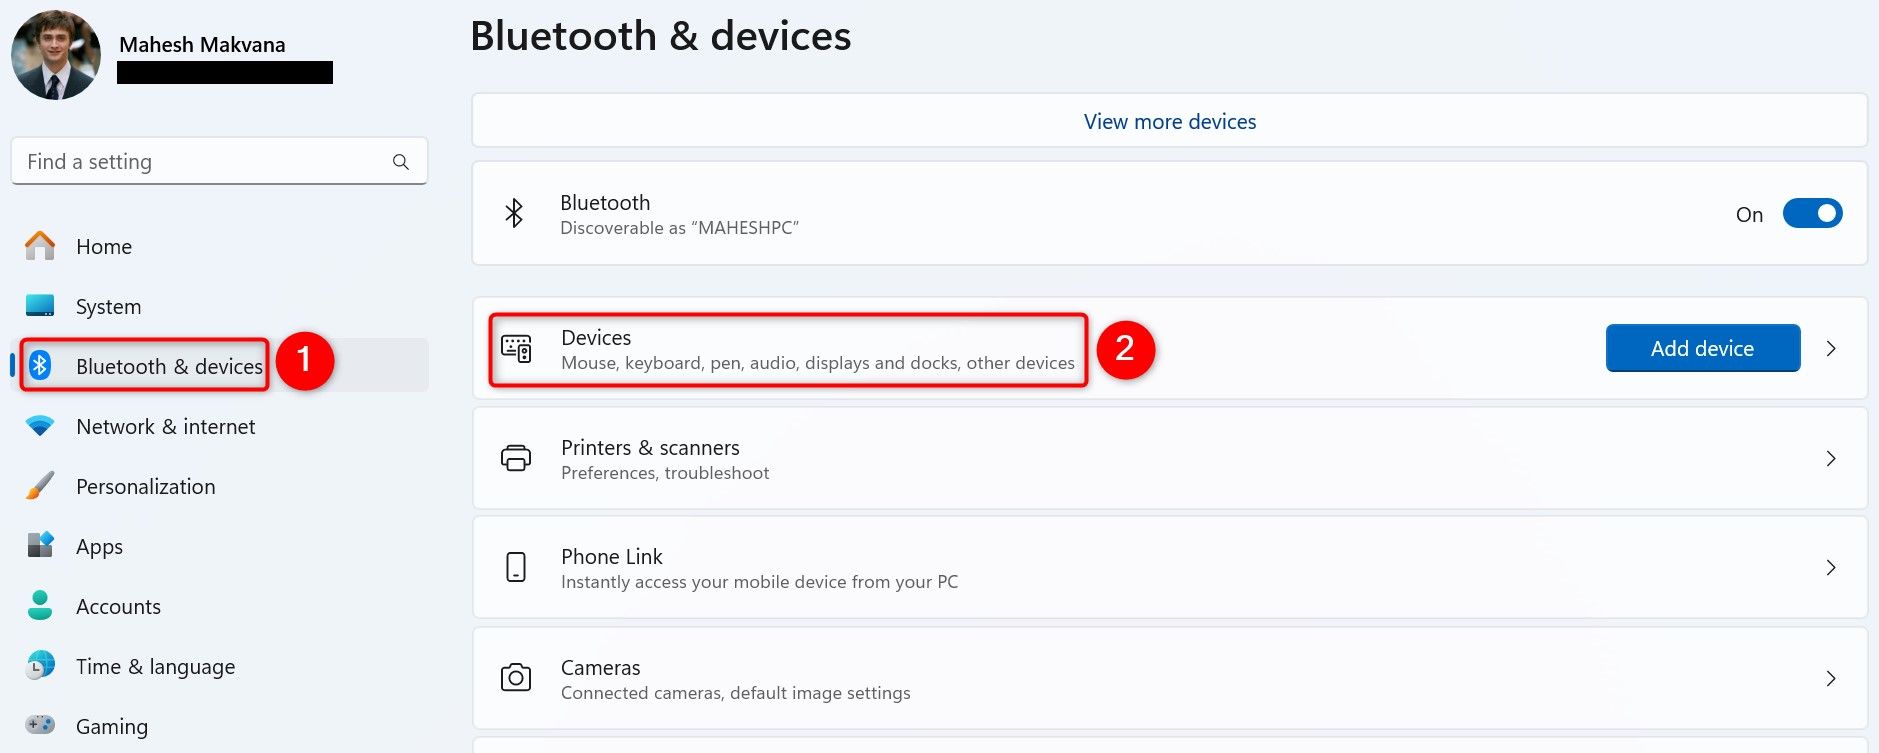 Bluetooth & Devices > Devices highlighted in Windows 11 Settings.